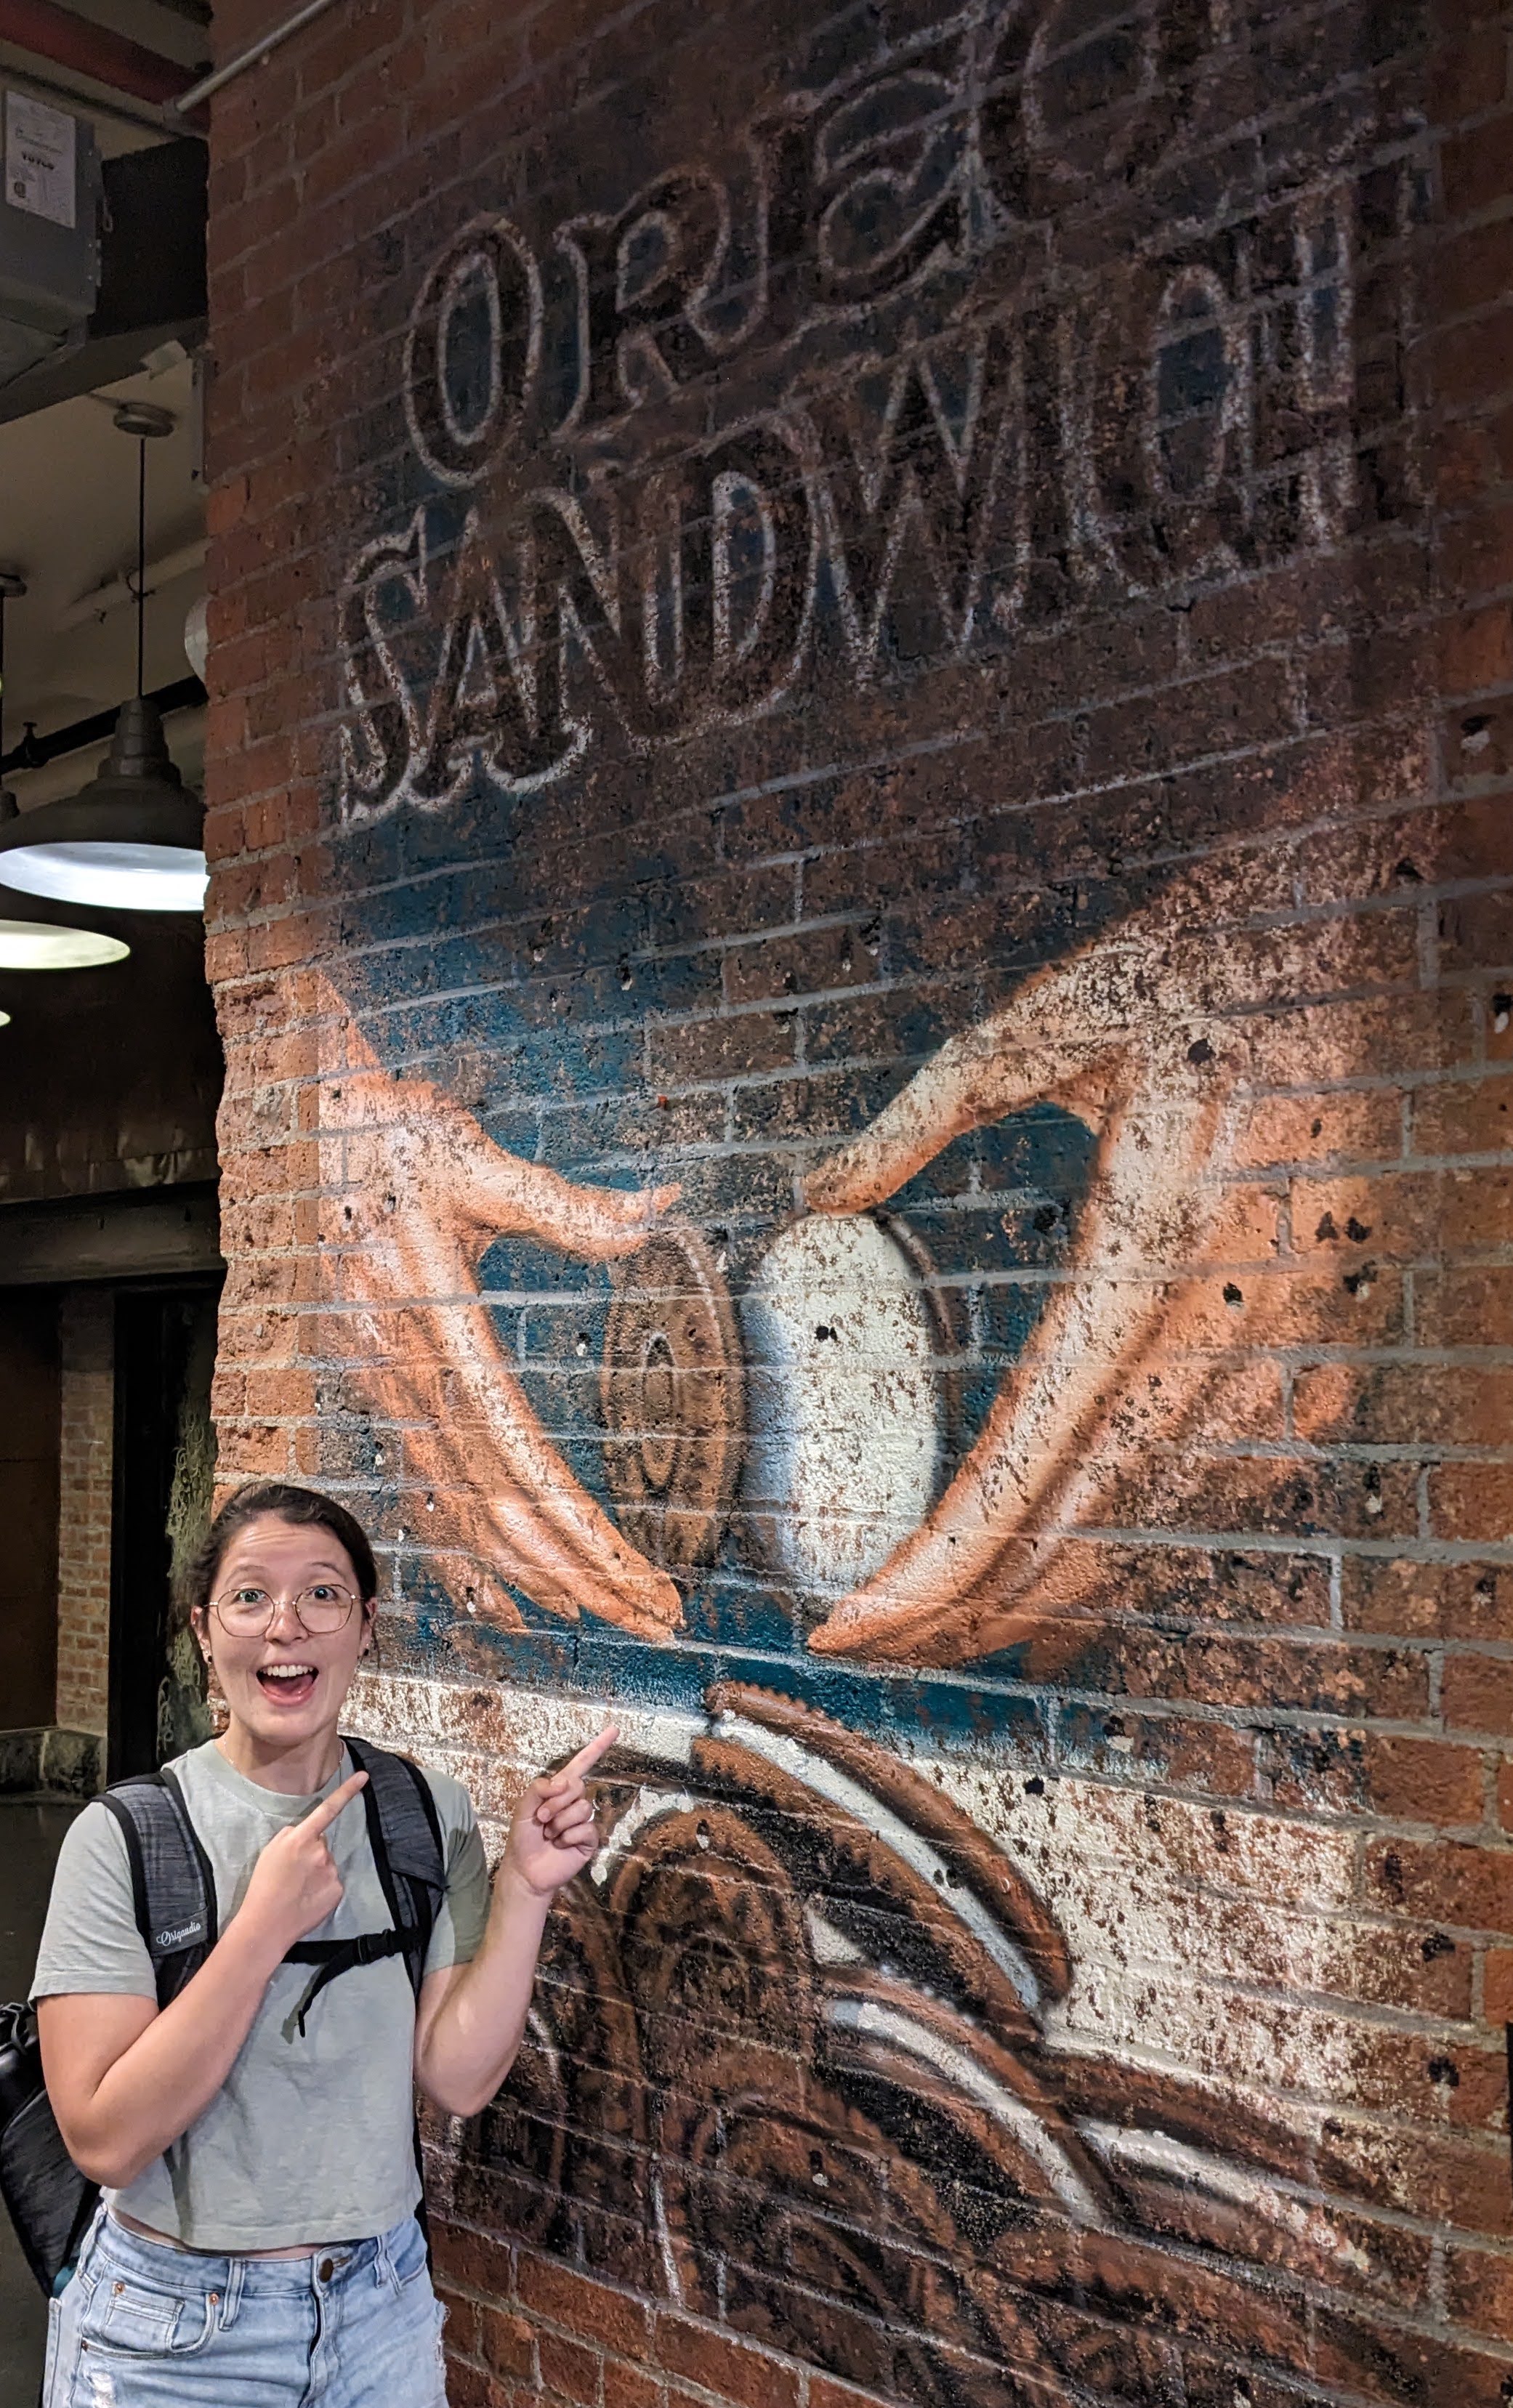 half-asian female with a ponytail and glasses pointing to a mural of an old oreo sandwich cookie advertisement on a brick wall